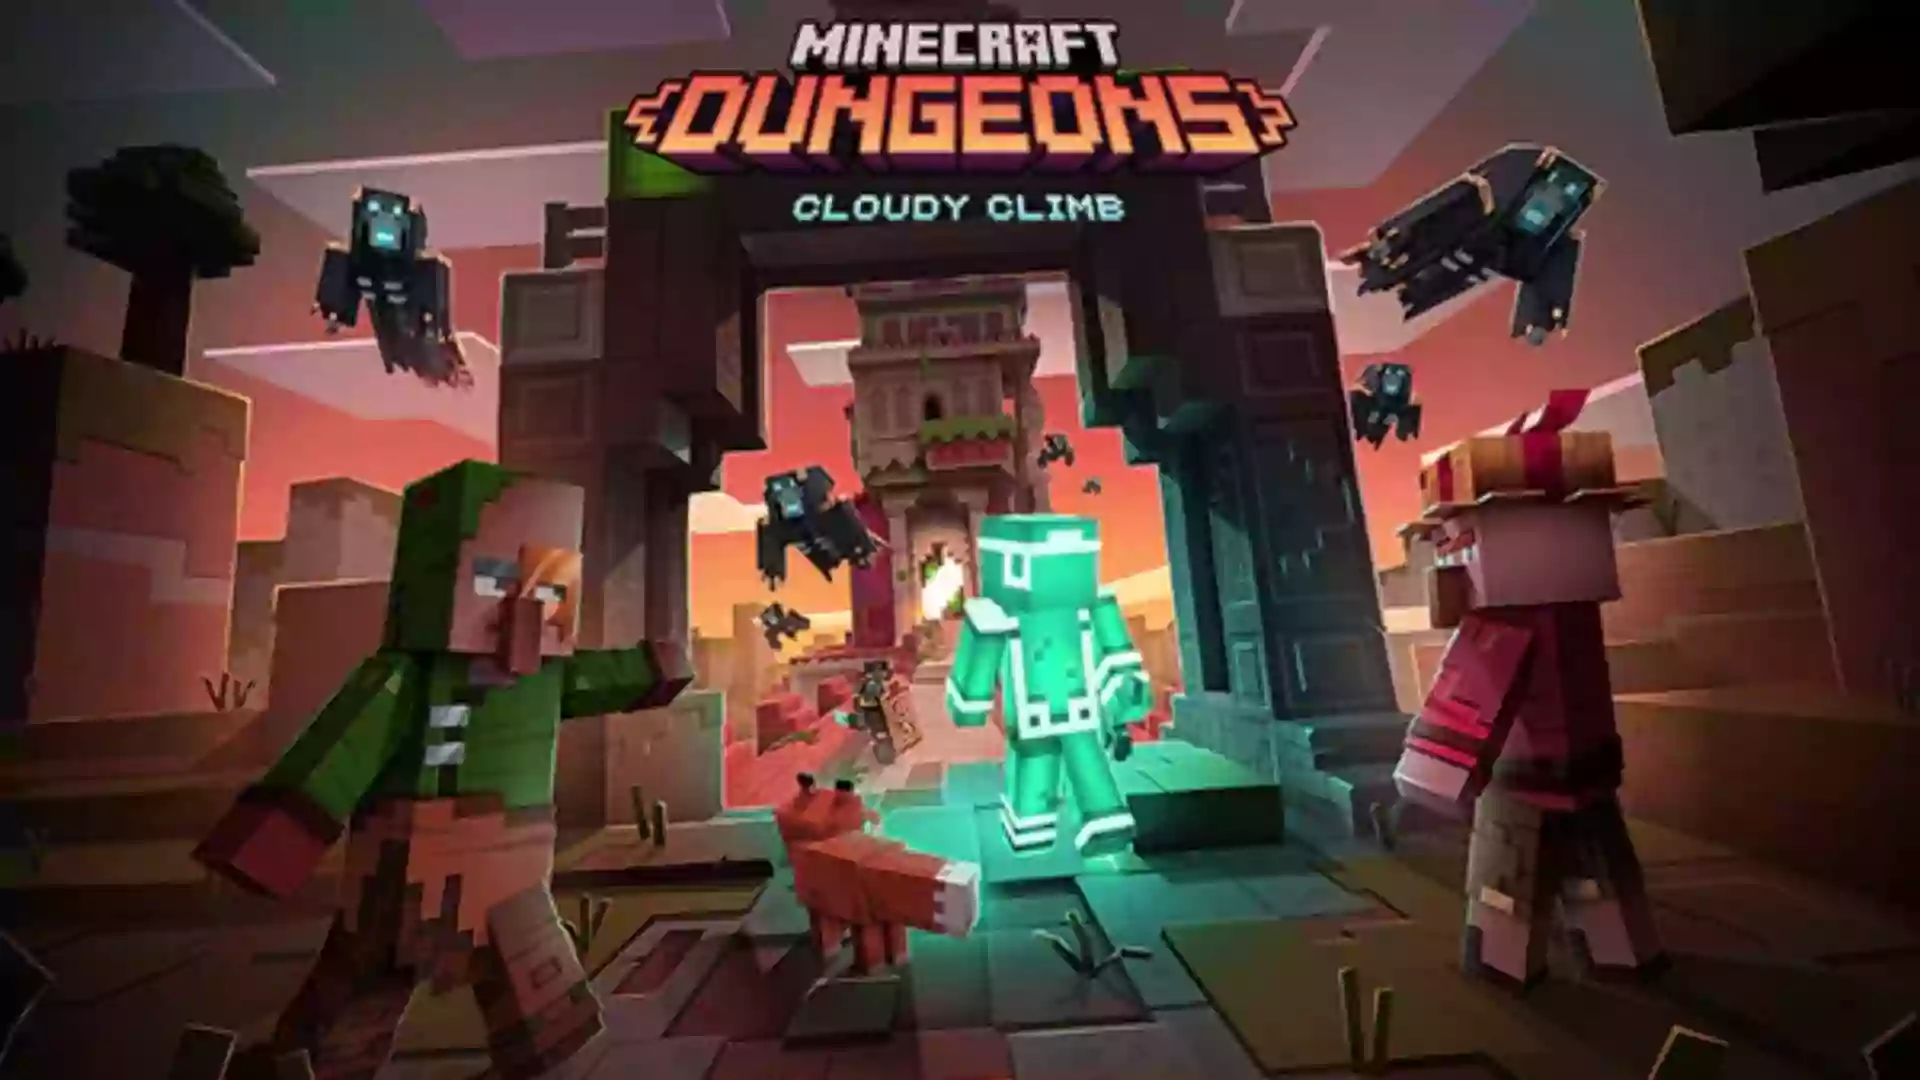 Minecraft Dungeons Parents Guide and Age Rating | 2020